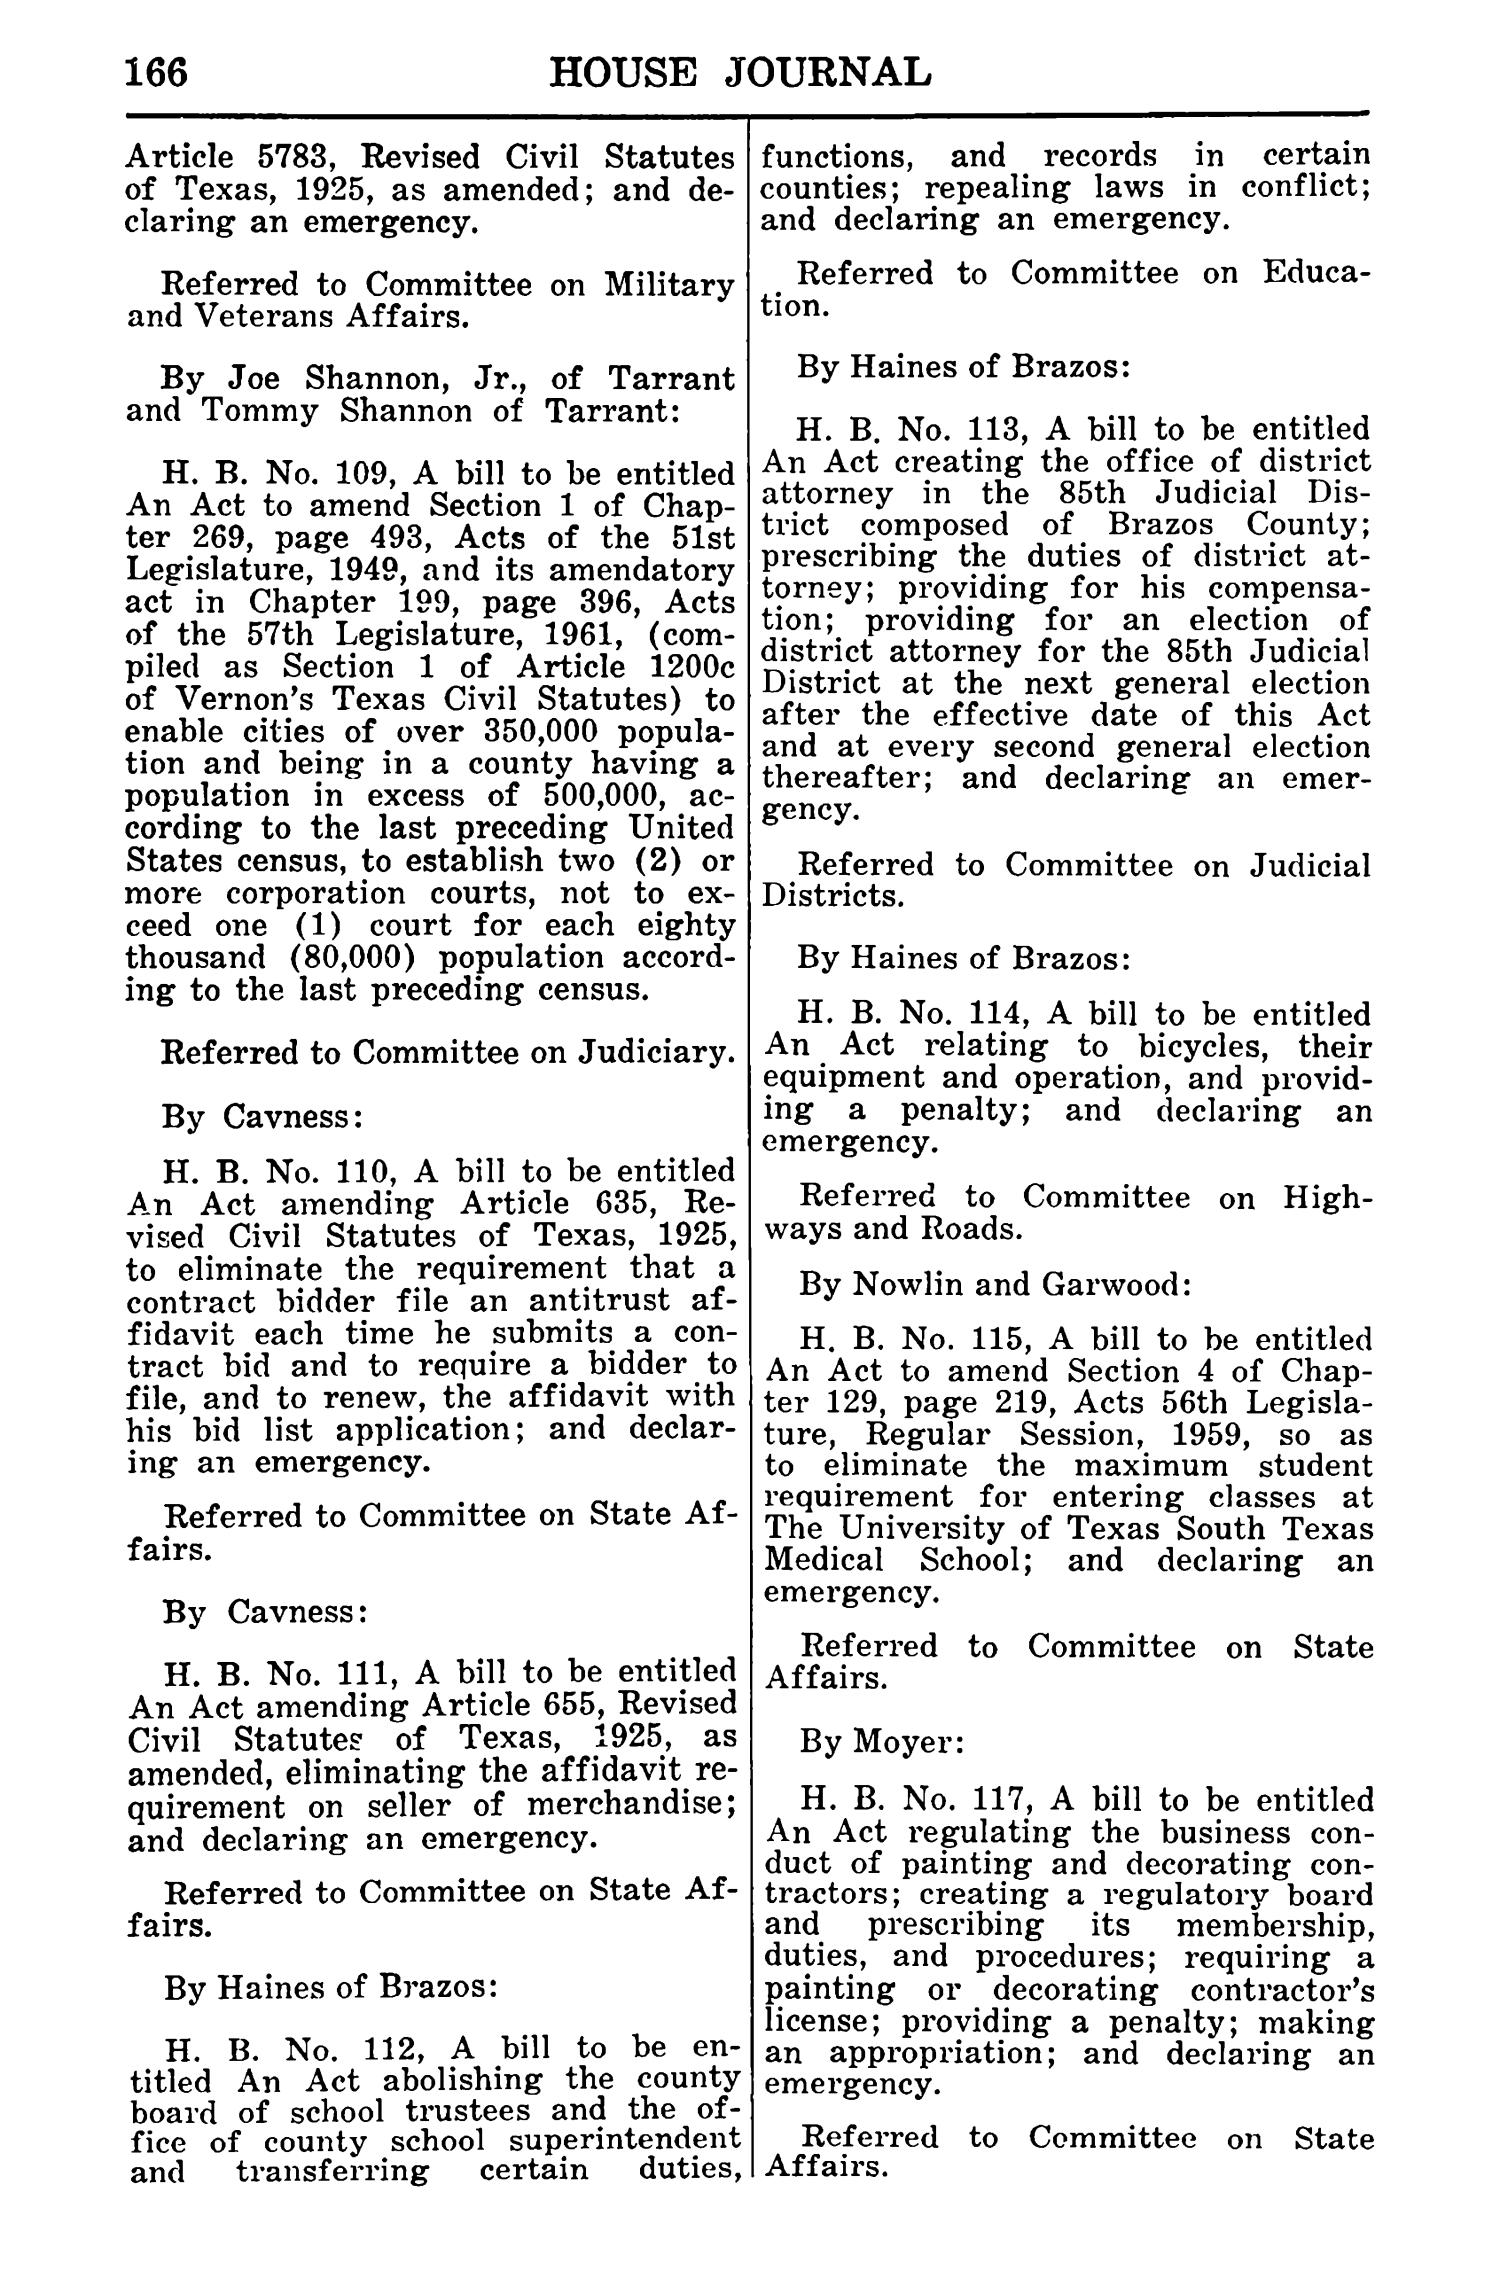 Journal of the House of Representatives of the Regular Session of the Sixtieth Legislature of the State of Texas, Volume 1
                                                
                                                    166
                                                